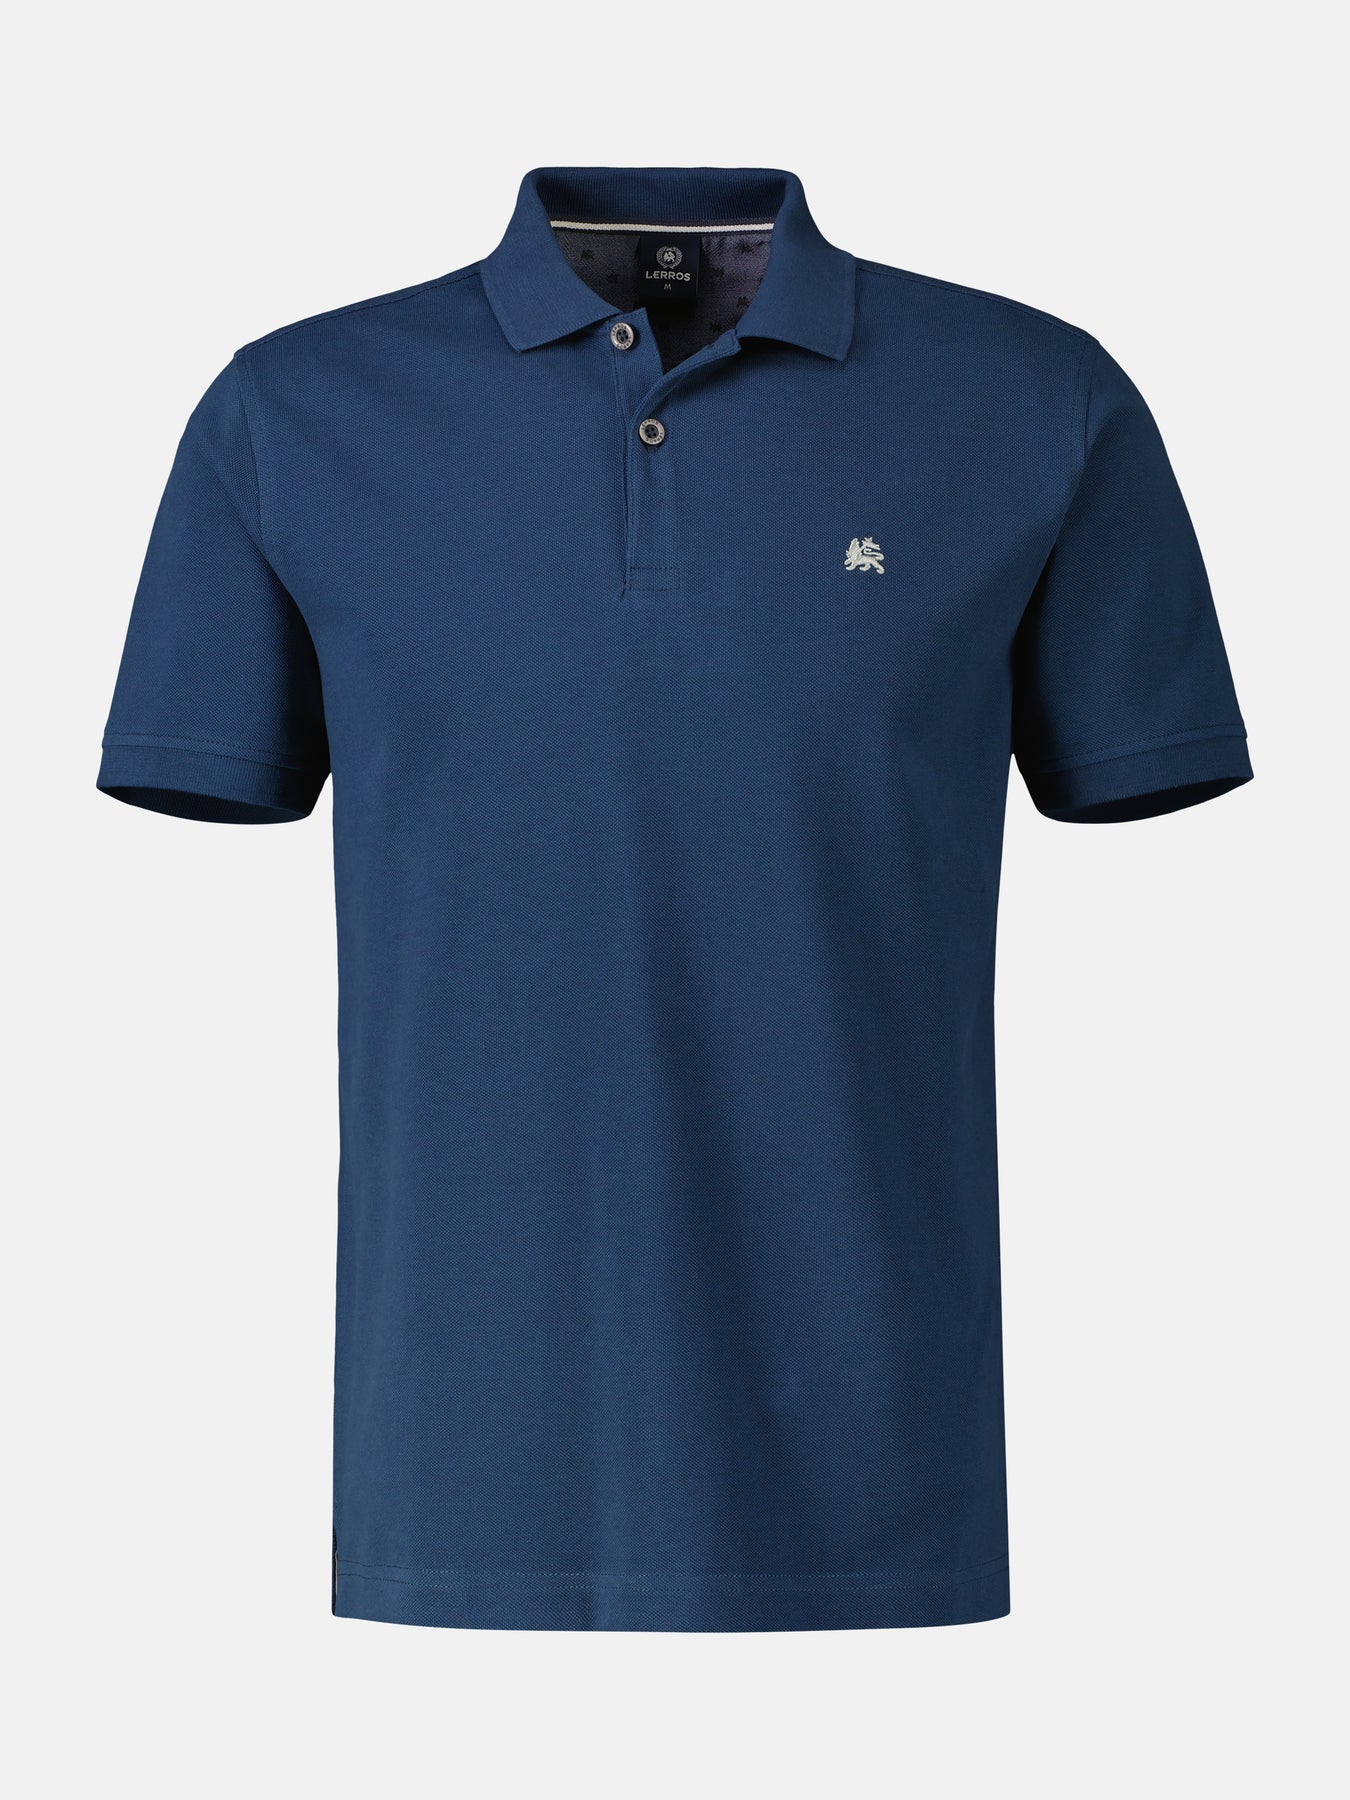 Polo shirt in many colors – LERROS SHOP